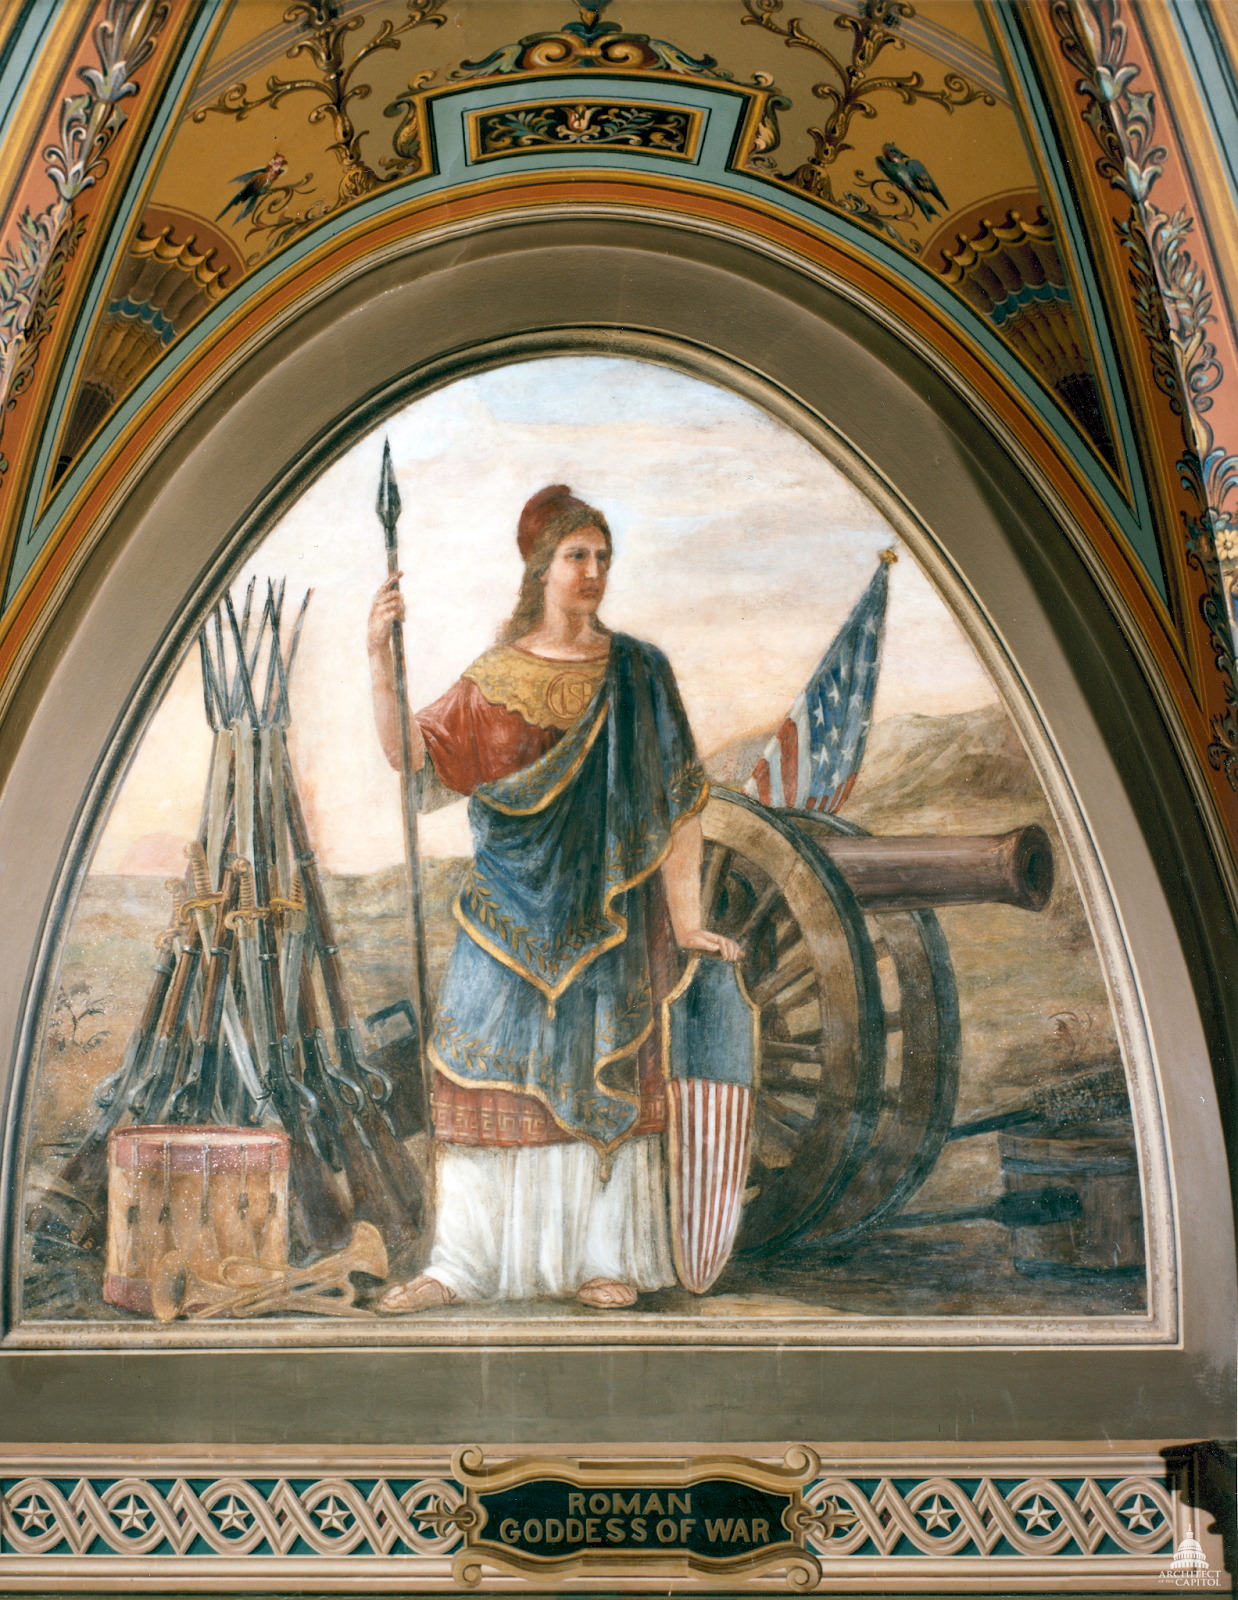 The "Architect of the Capitol" by Constantino Brumidi, located in the Senate wing of the U.S. Capitol, depicts the Roman goddess of war watching over the entrance to the Military Affairs Committee's chamber. 